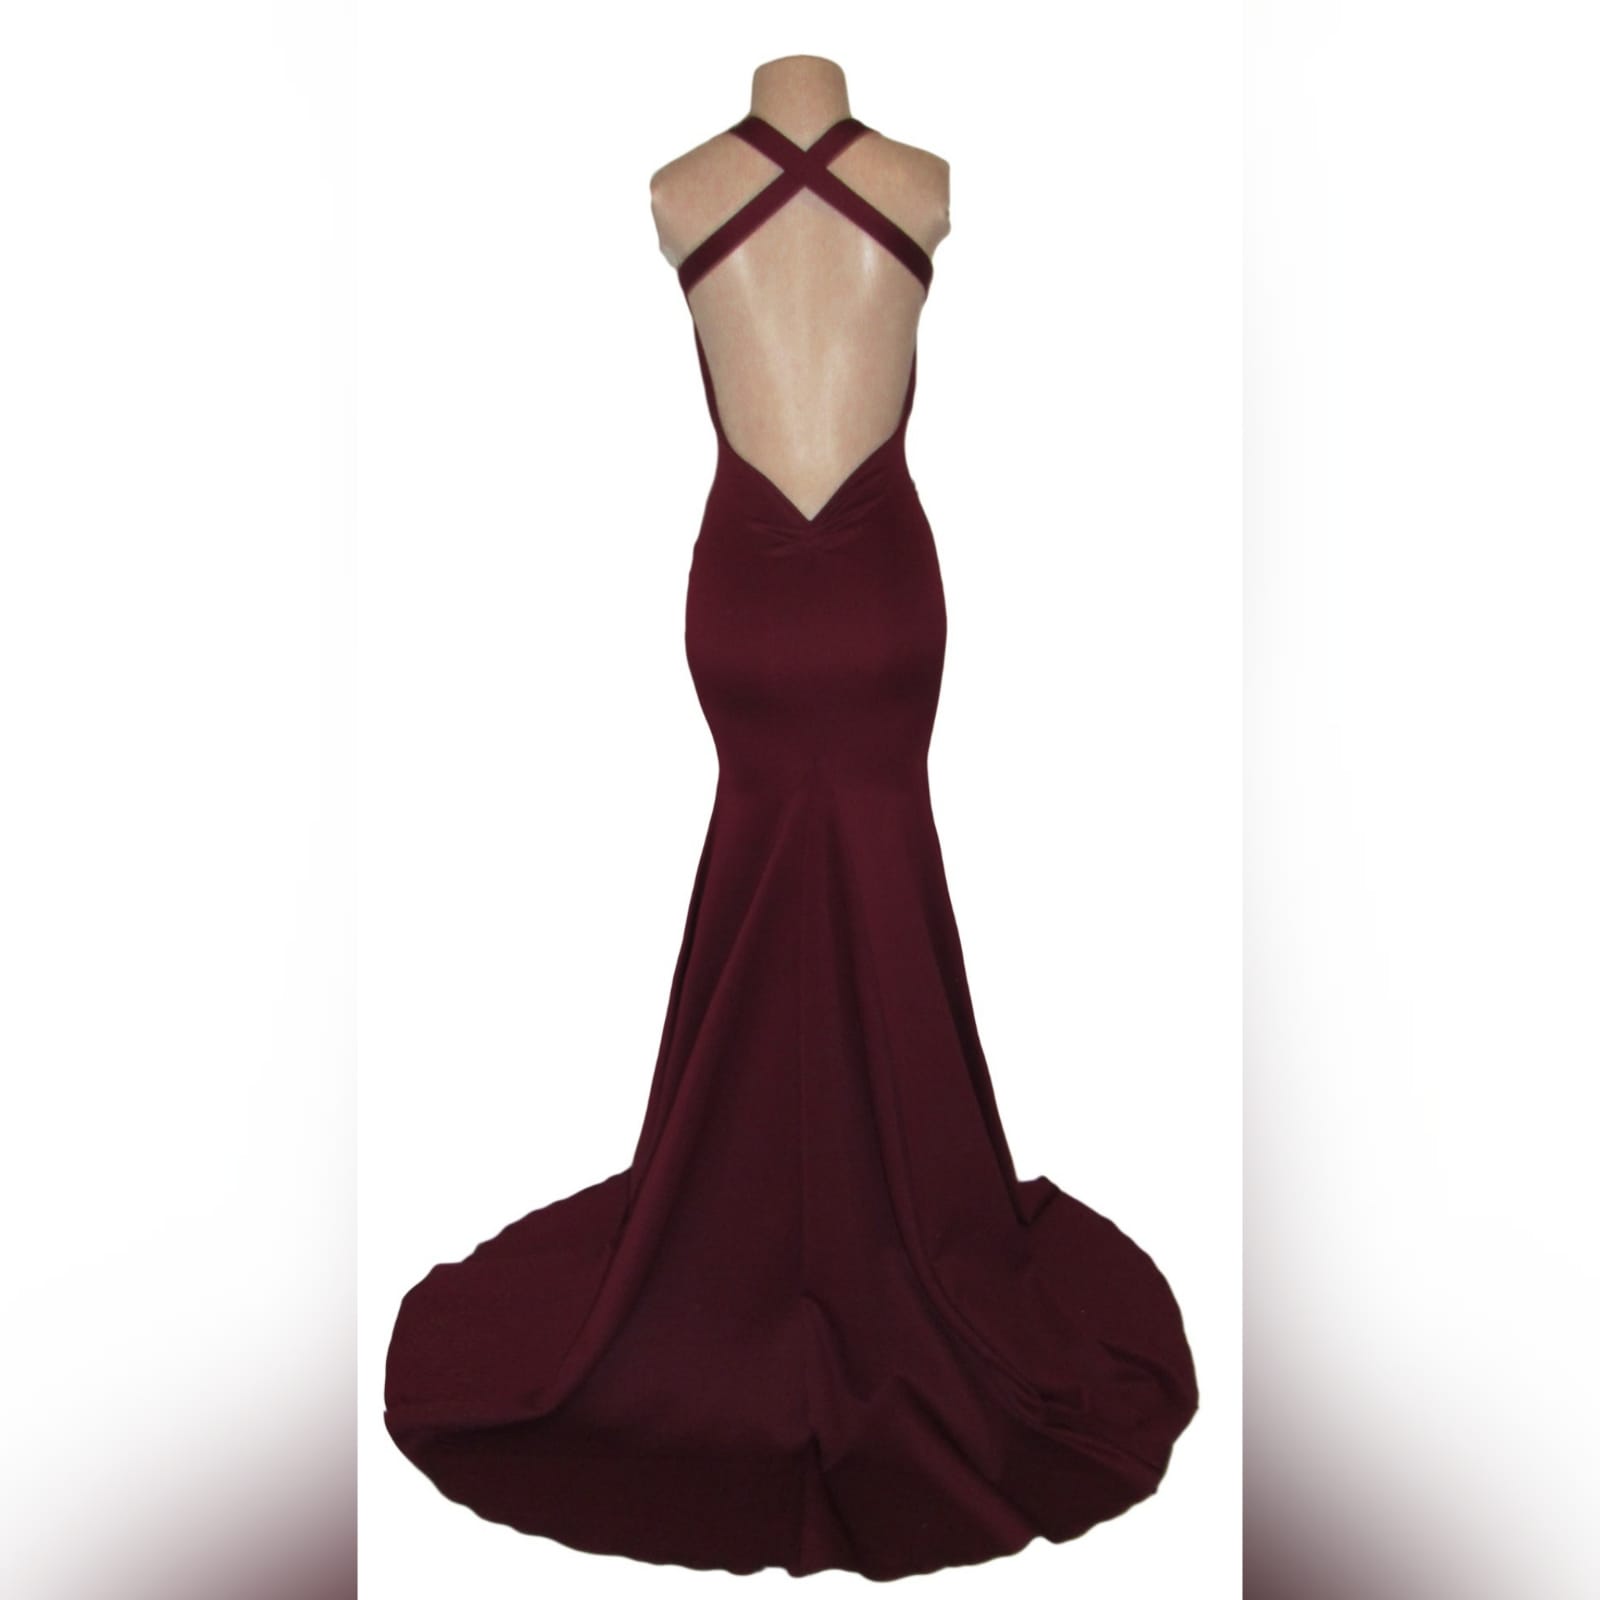 Burgundy soft mermaid sexy matric dress 3 burgundy soft mermaid sexy matric dress with a v neckline, low naked back and a train.